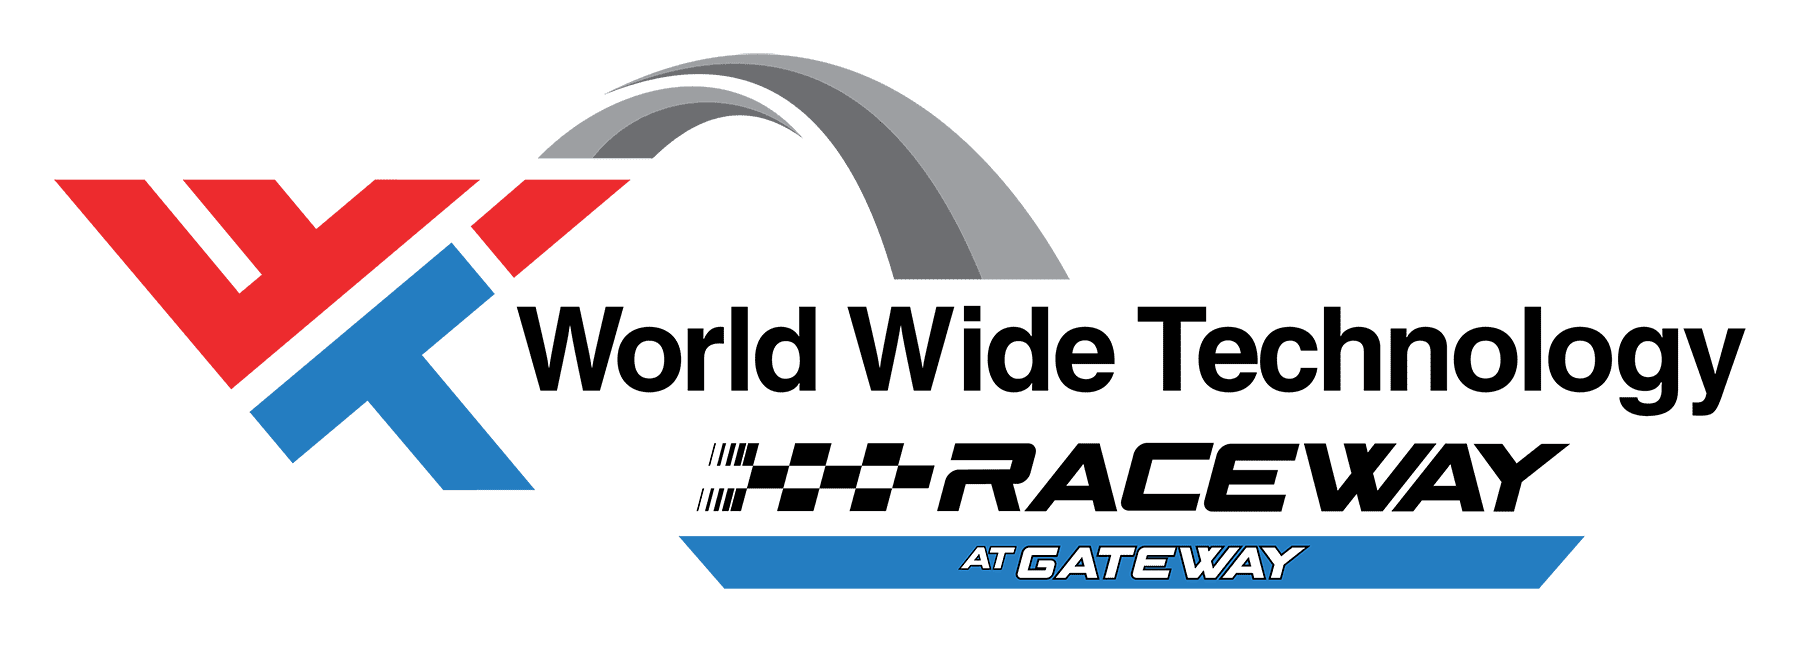 Fast access and parking information for World Wide Technology Raceways - St